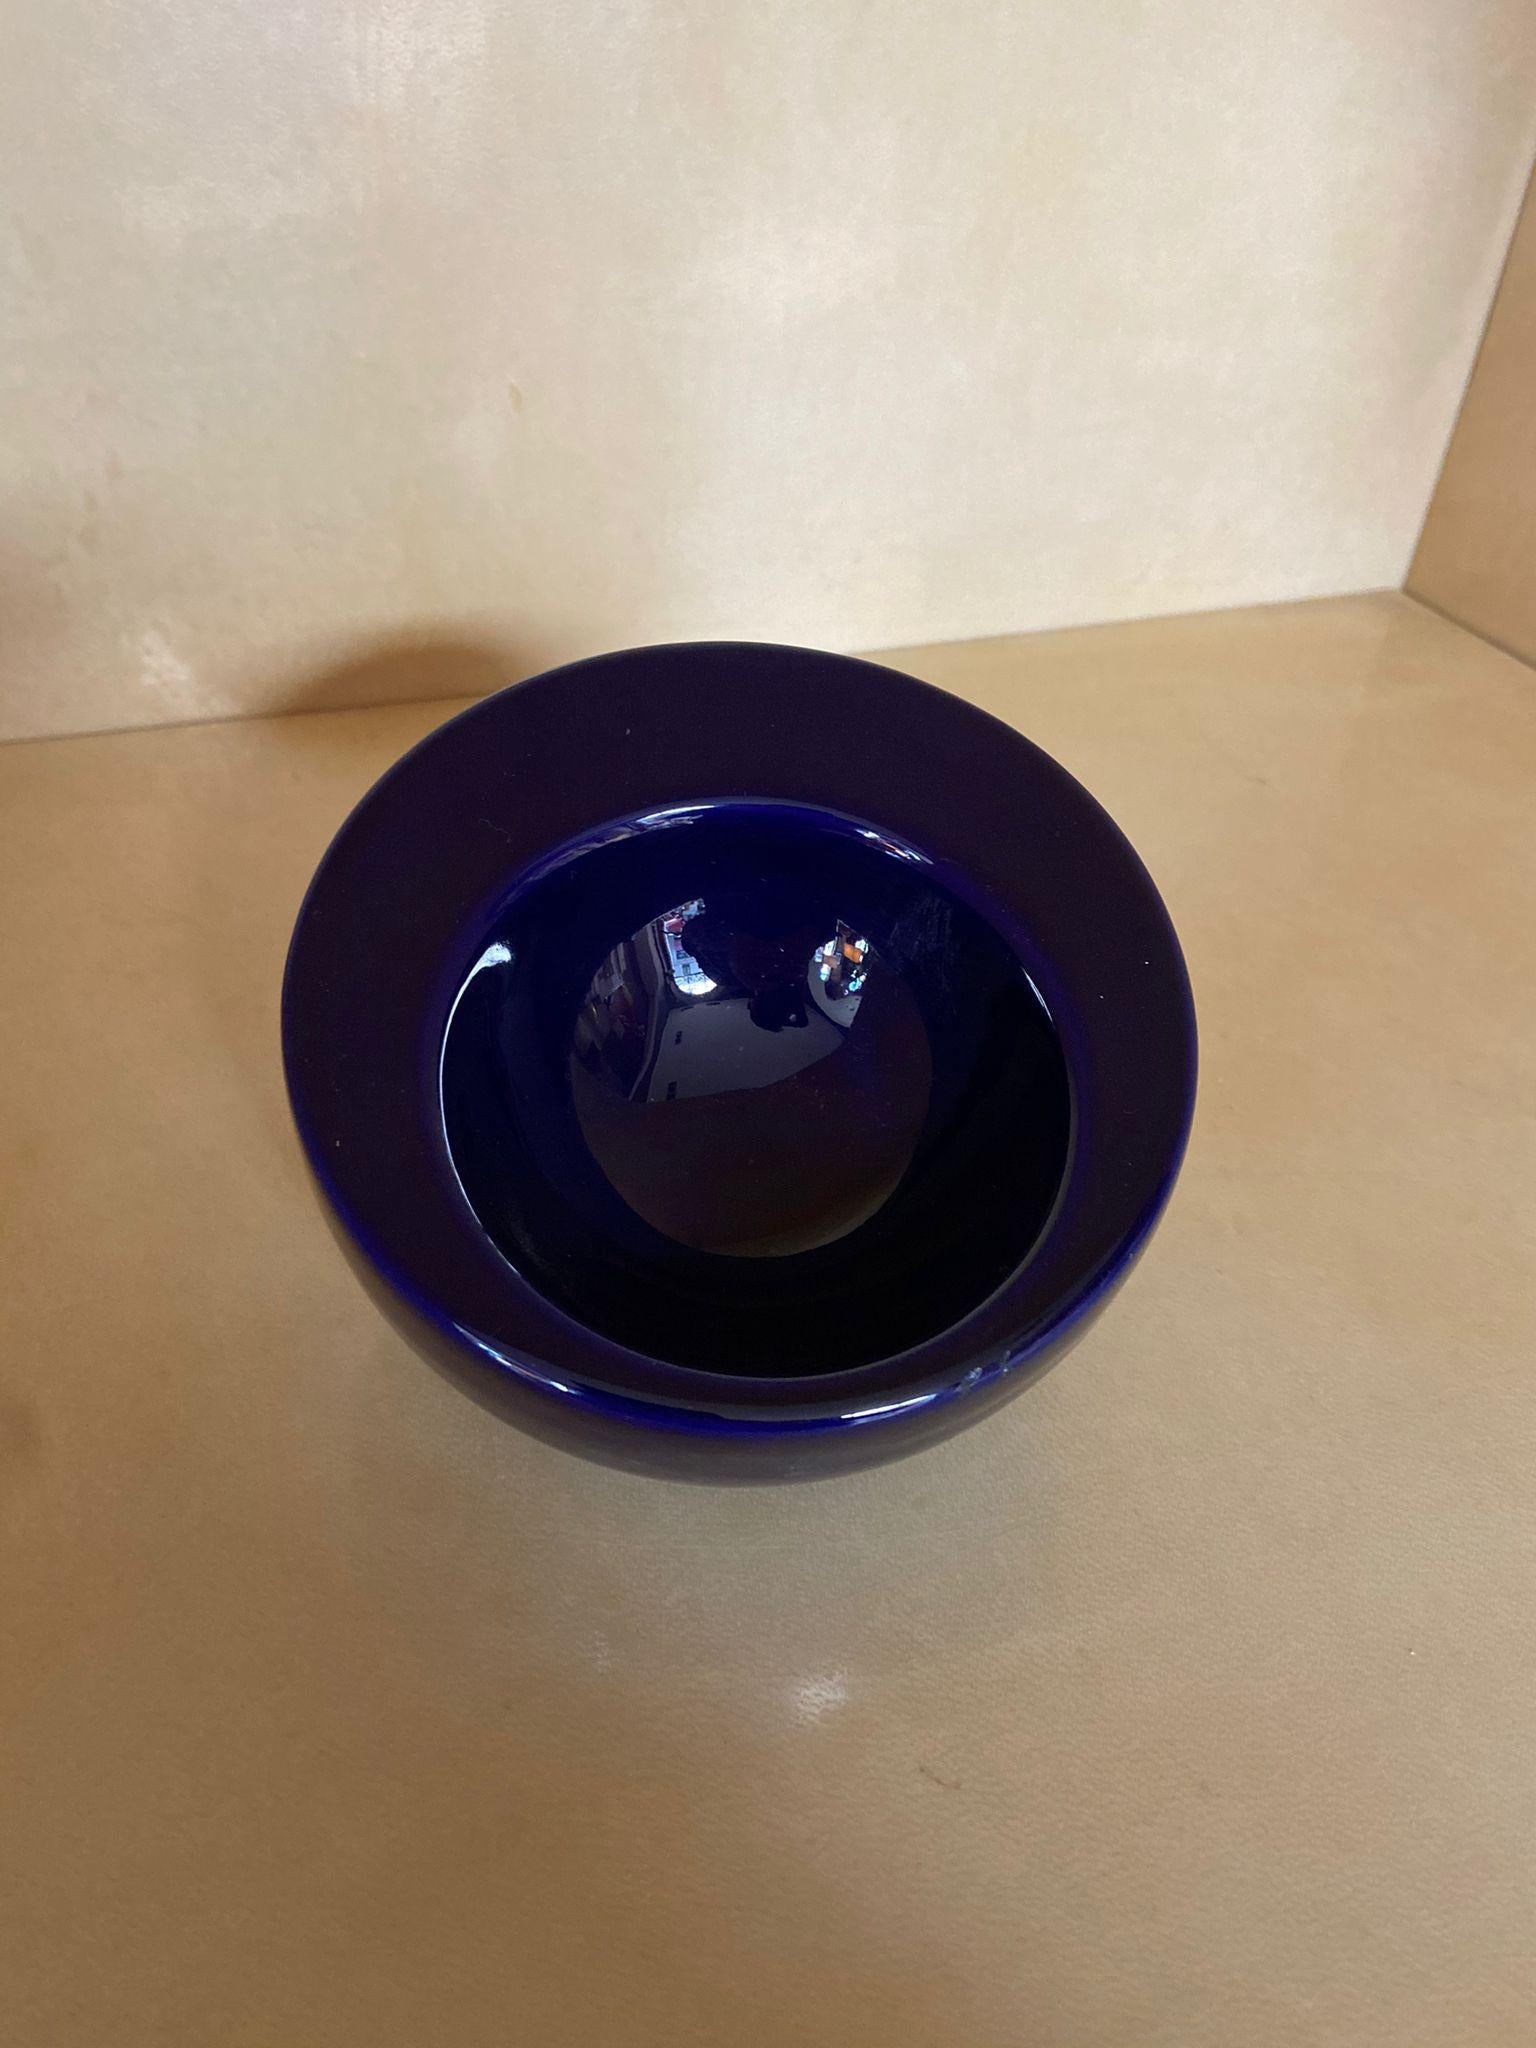 European 1970s Space Age Blue Ashtray in Ceramic by Gabbianelli, Made in Italy